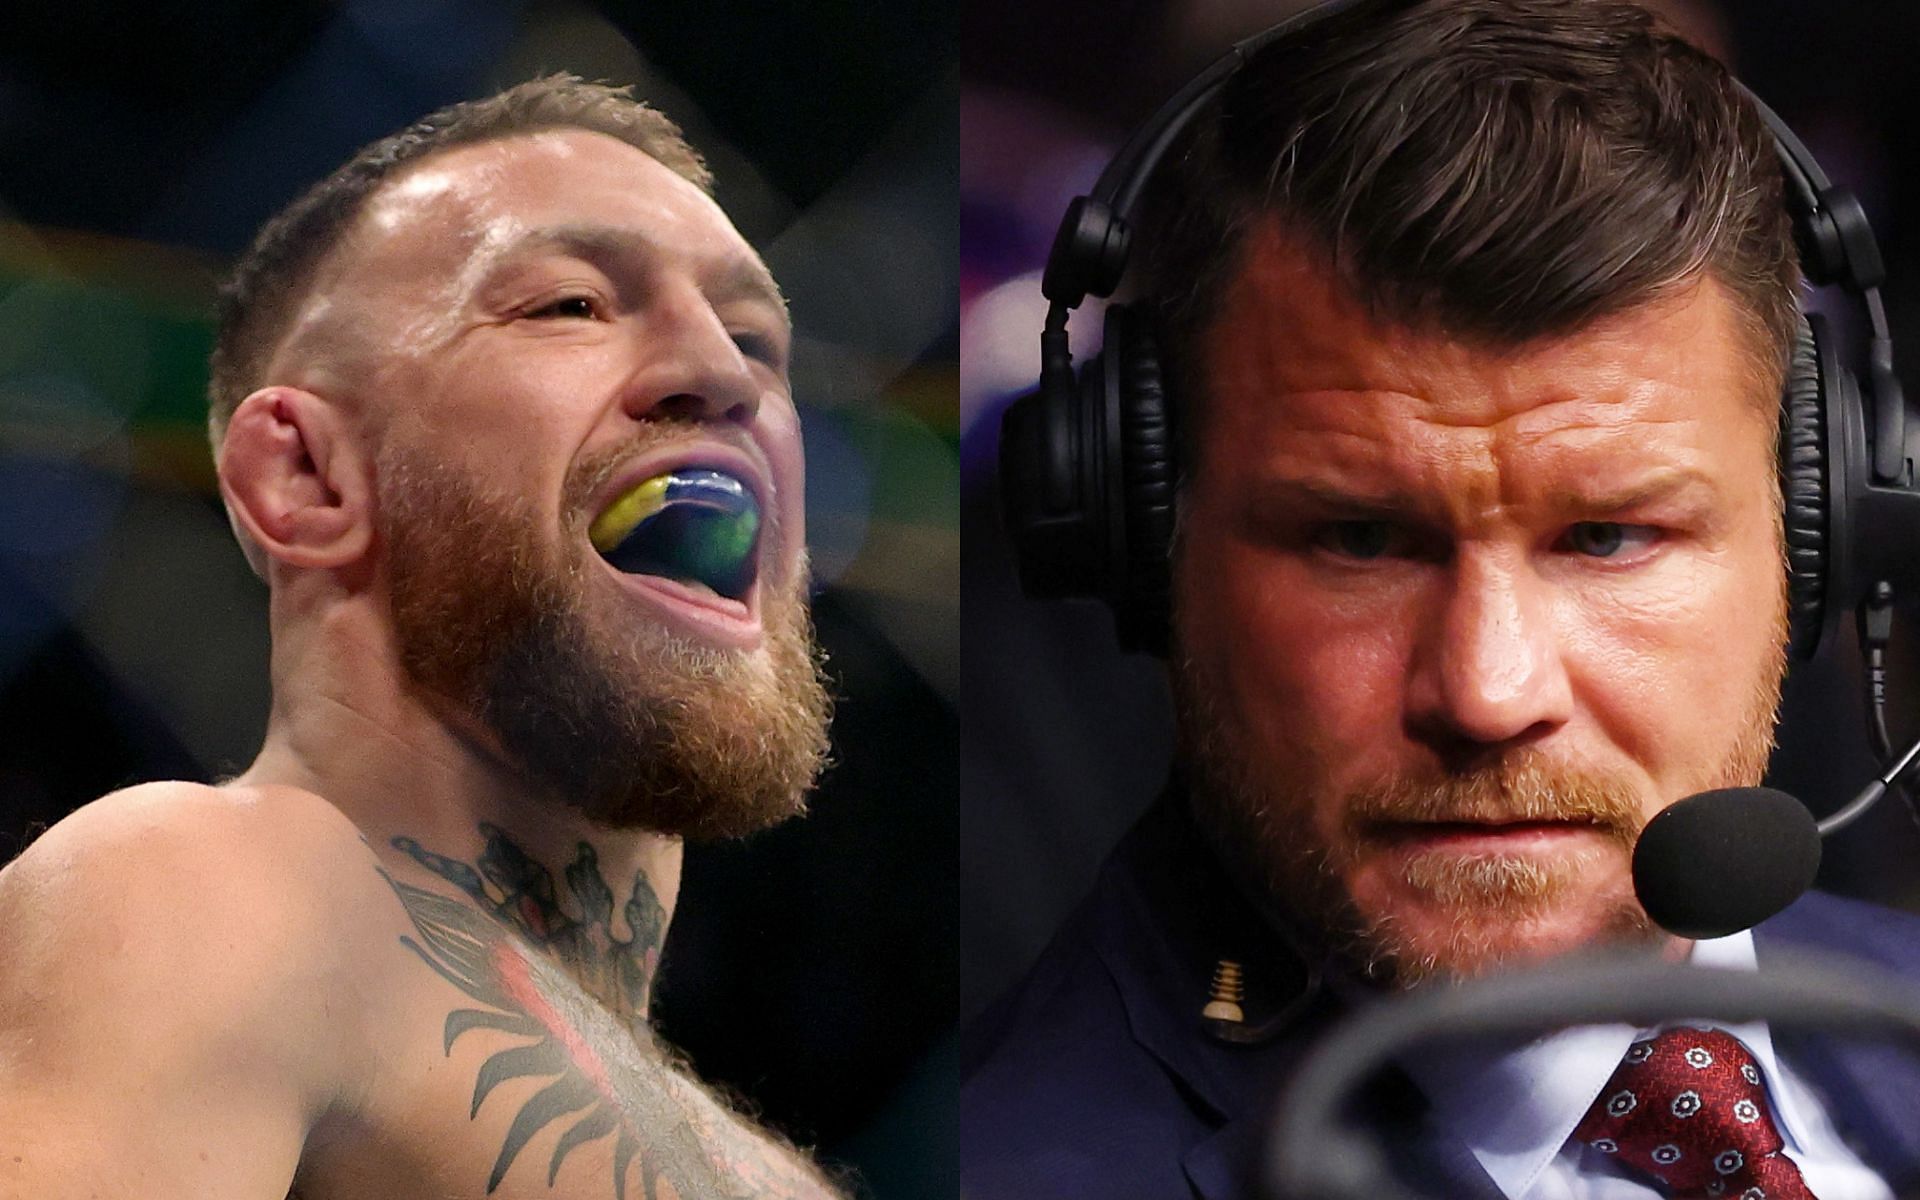 Conor McGregor (left), Michael Bisping (right)